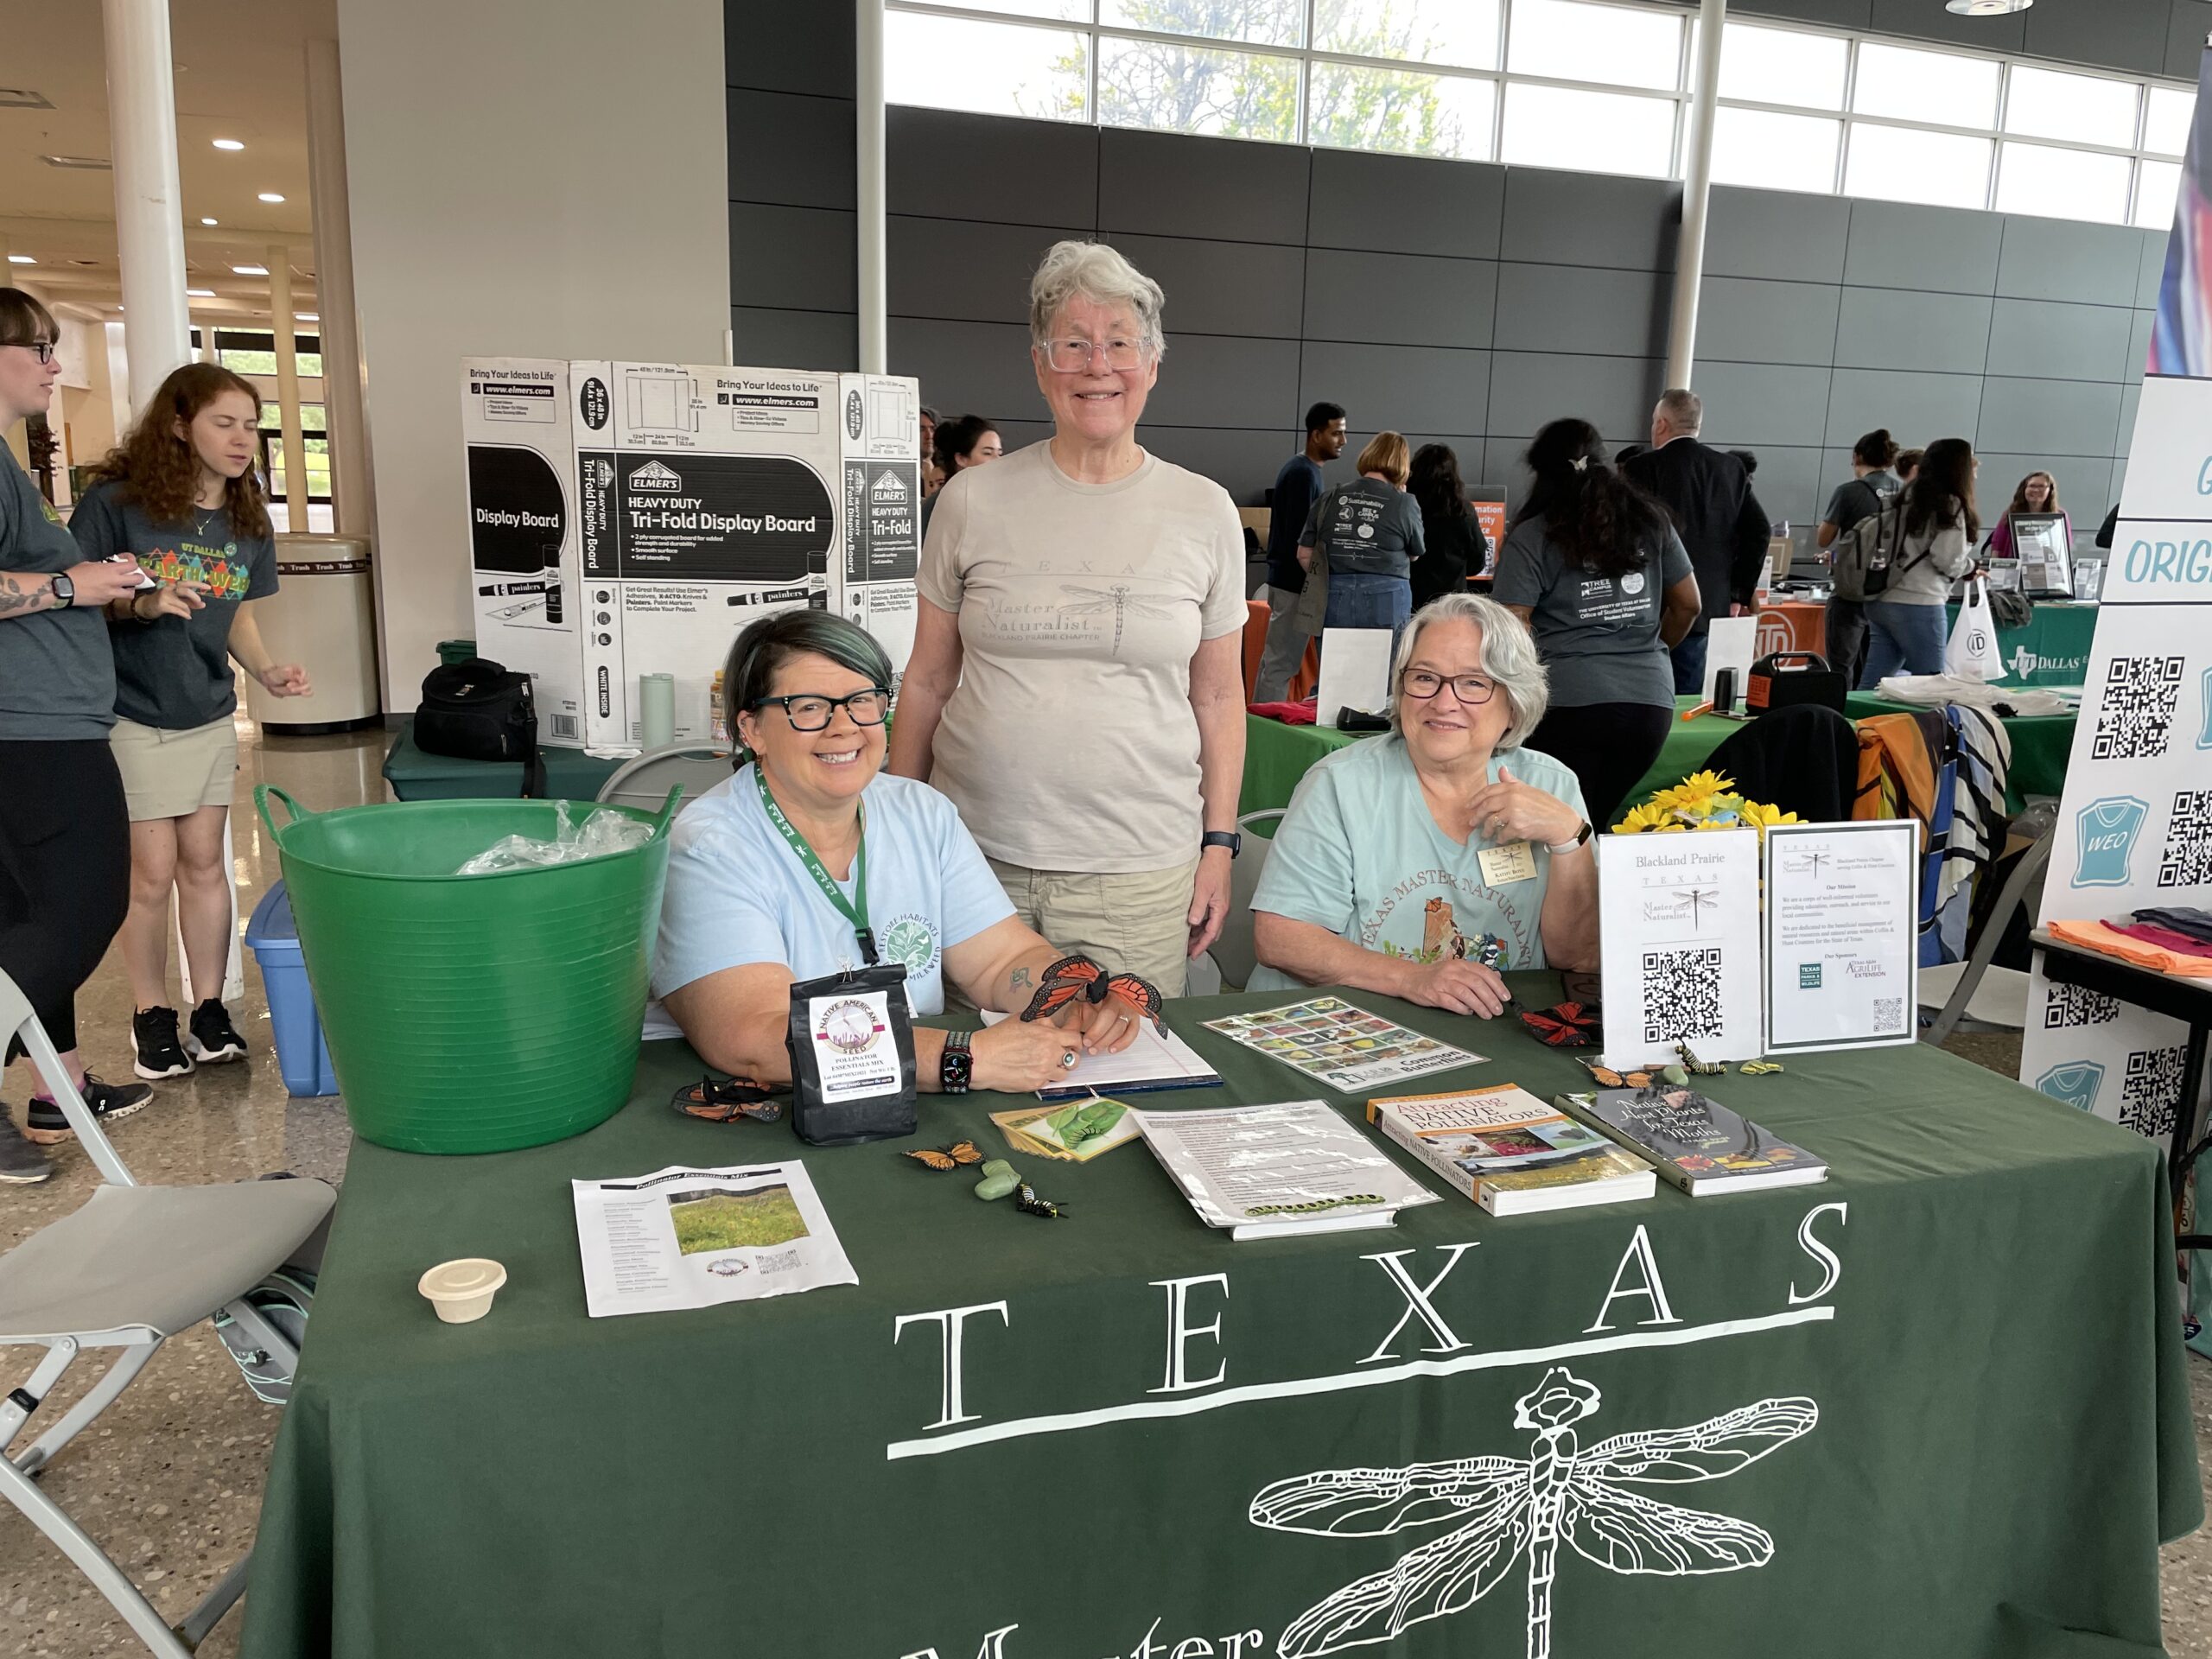 Community Engagement Booth with Tina Burke Barb Hibbard Kathy Boys at an Earth Day Event UT Dallas Photo by Marla Layne